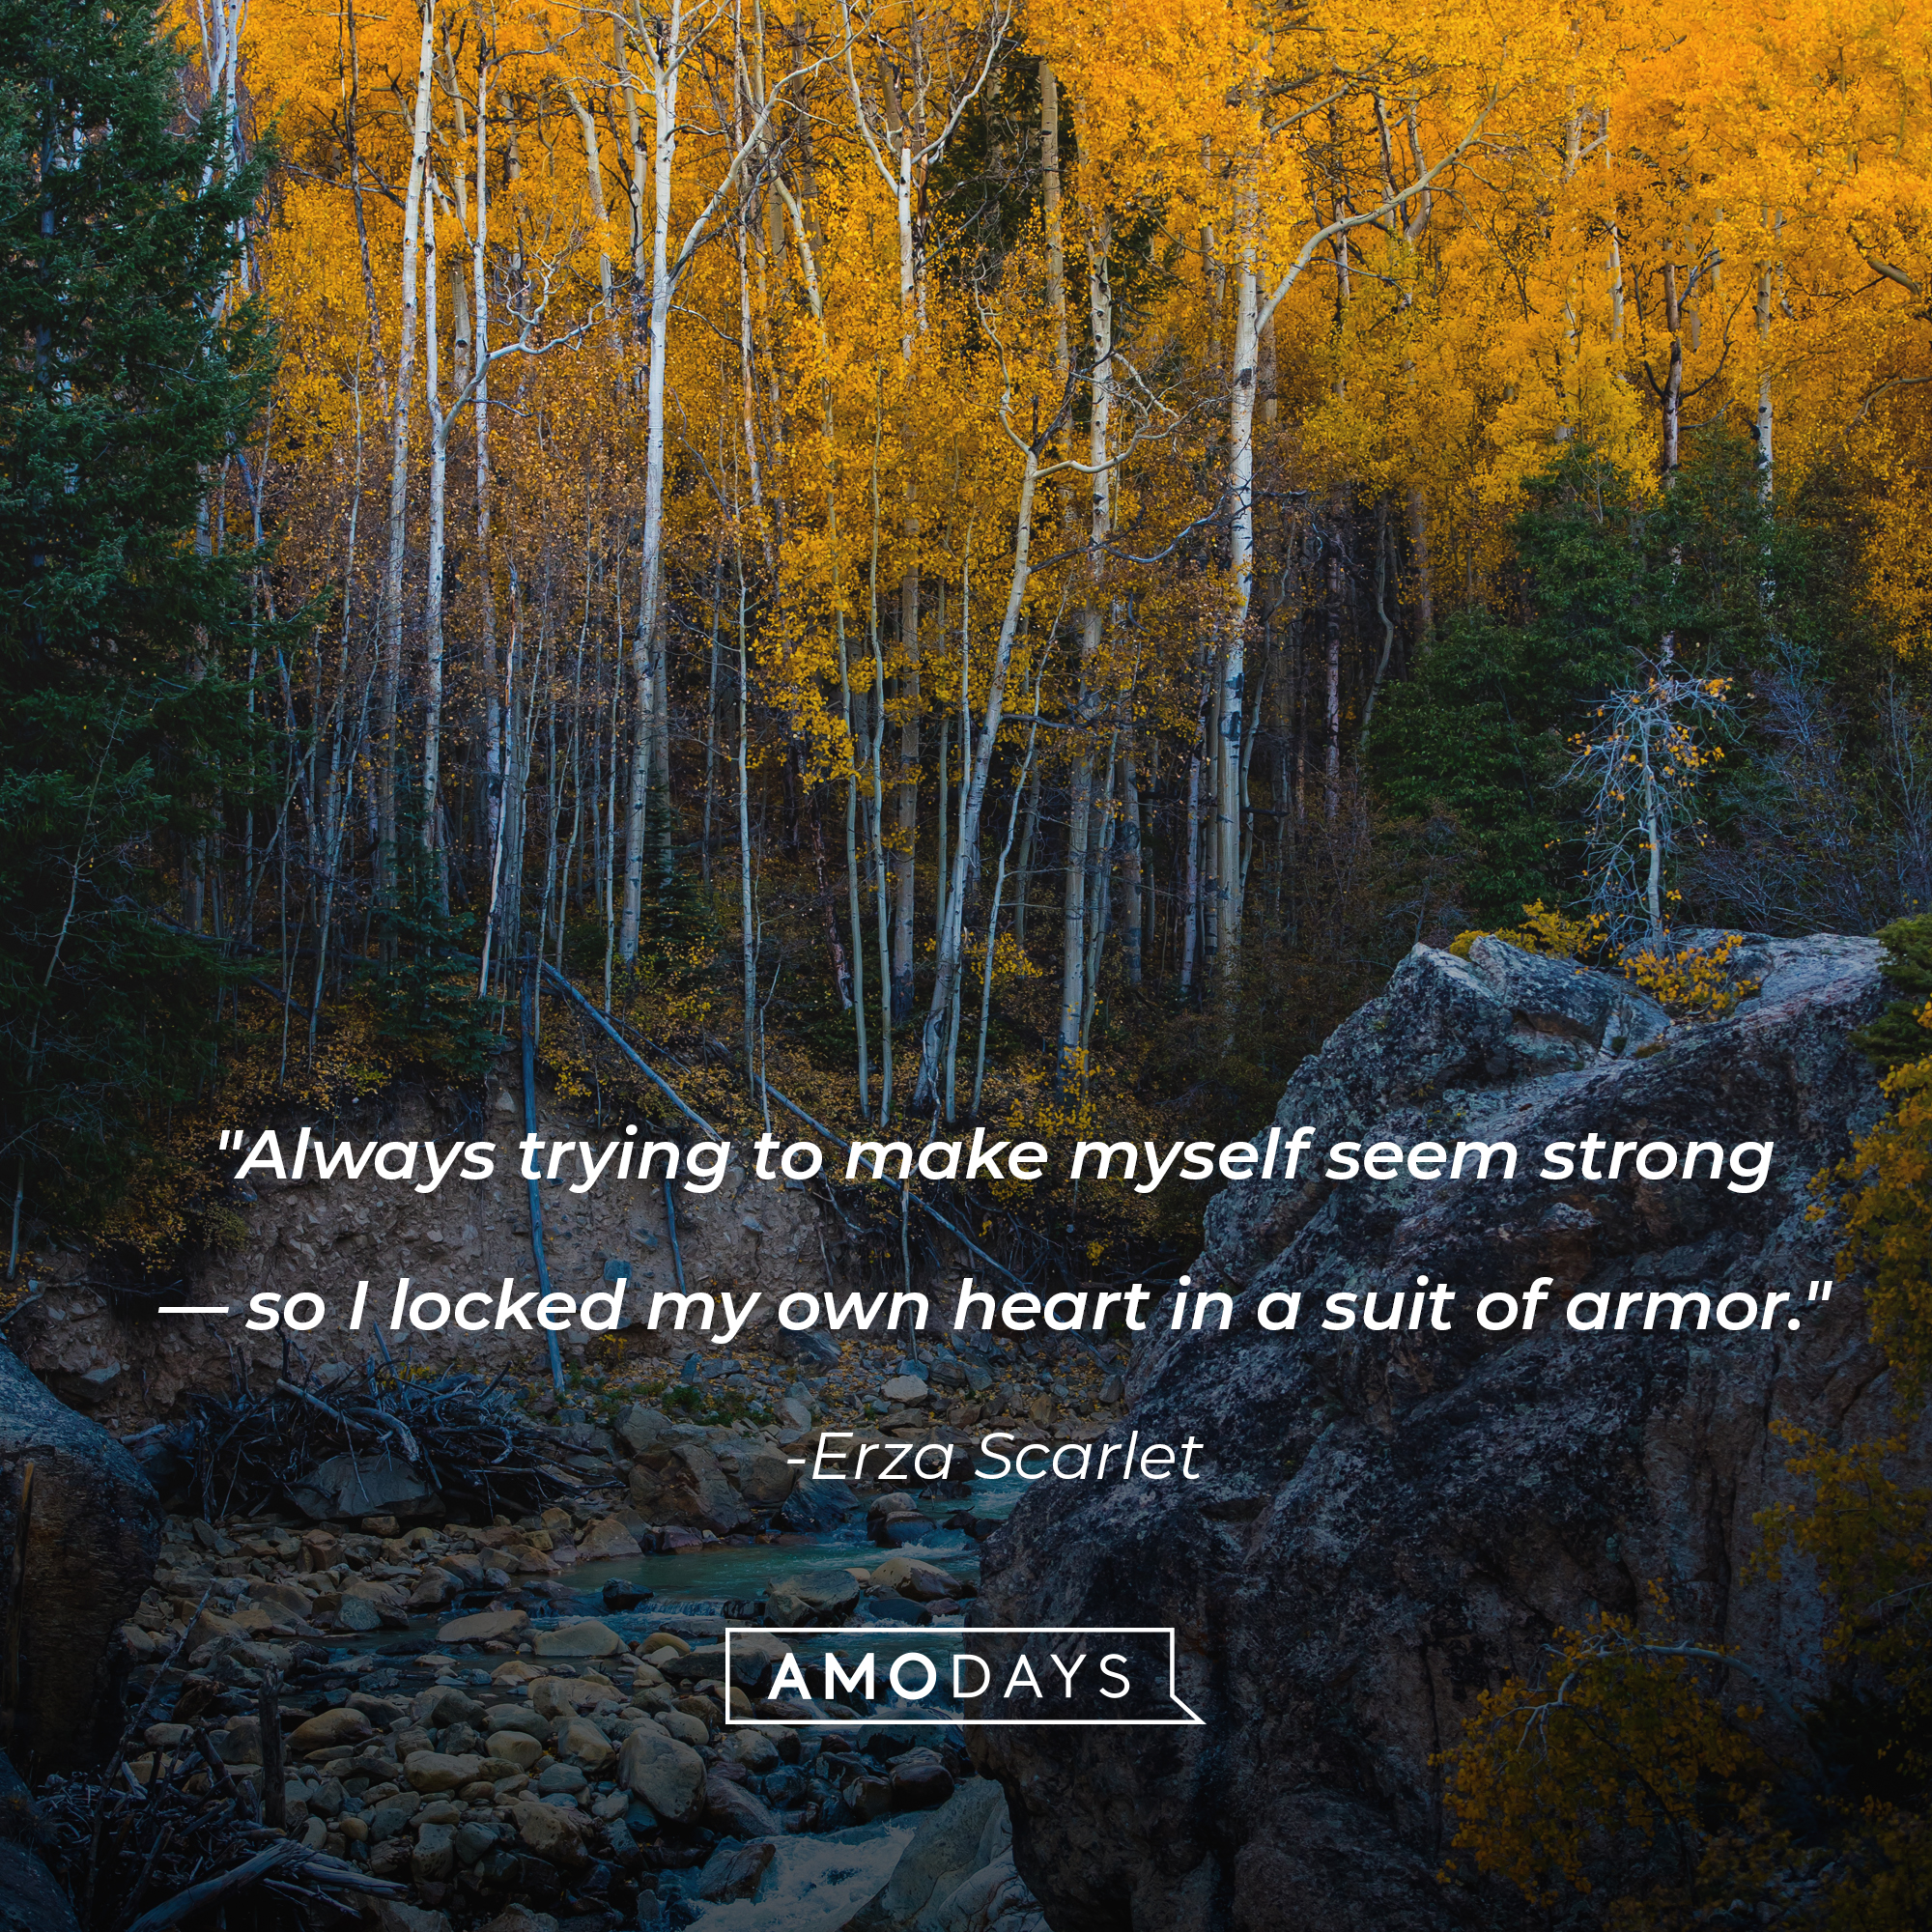 Erza Scarlet's quote: "Always trying to make myself seem strong―so I locked my own heart in a suit of armor." | Image: Unsplash